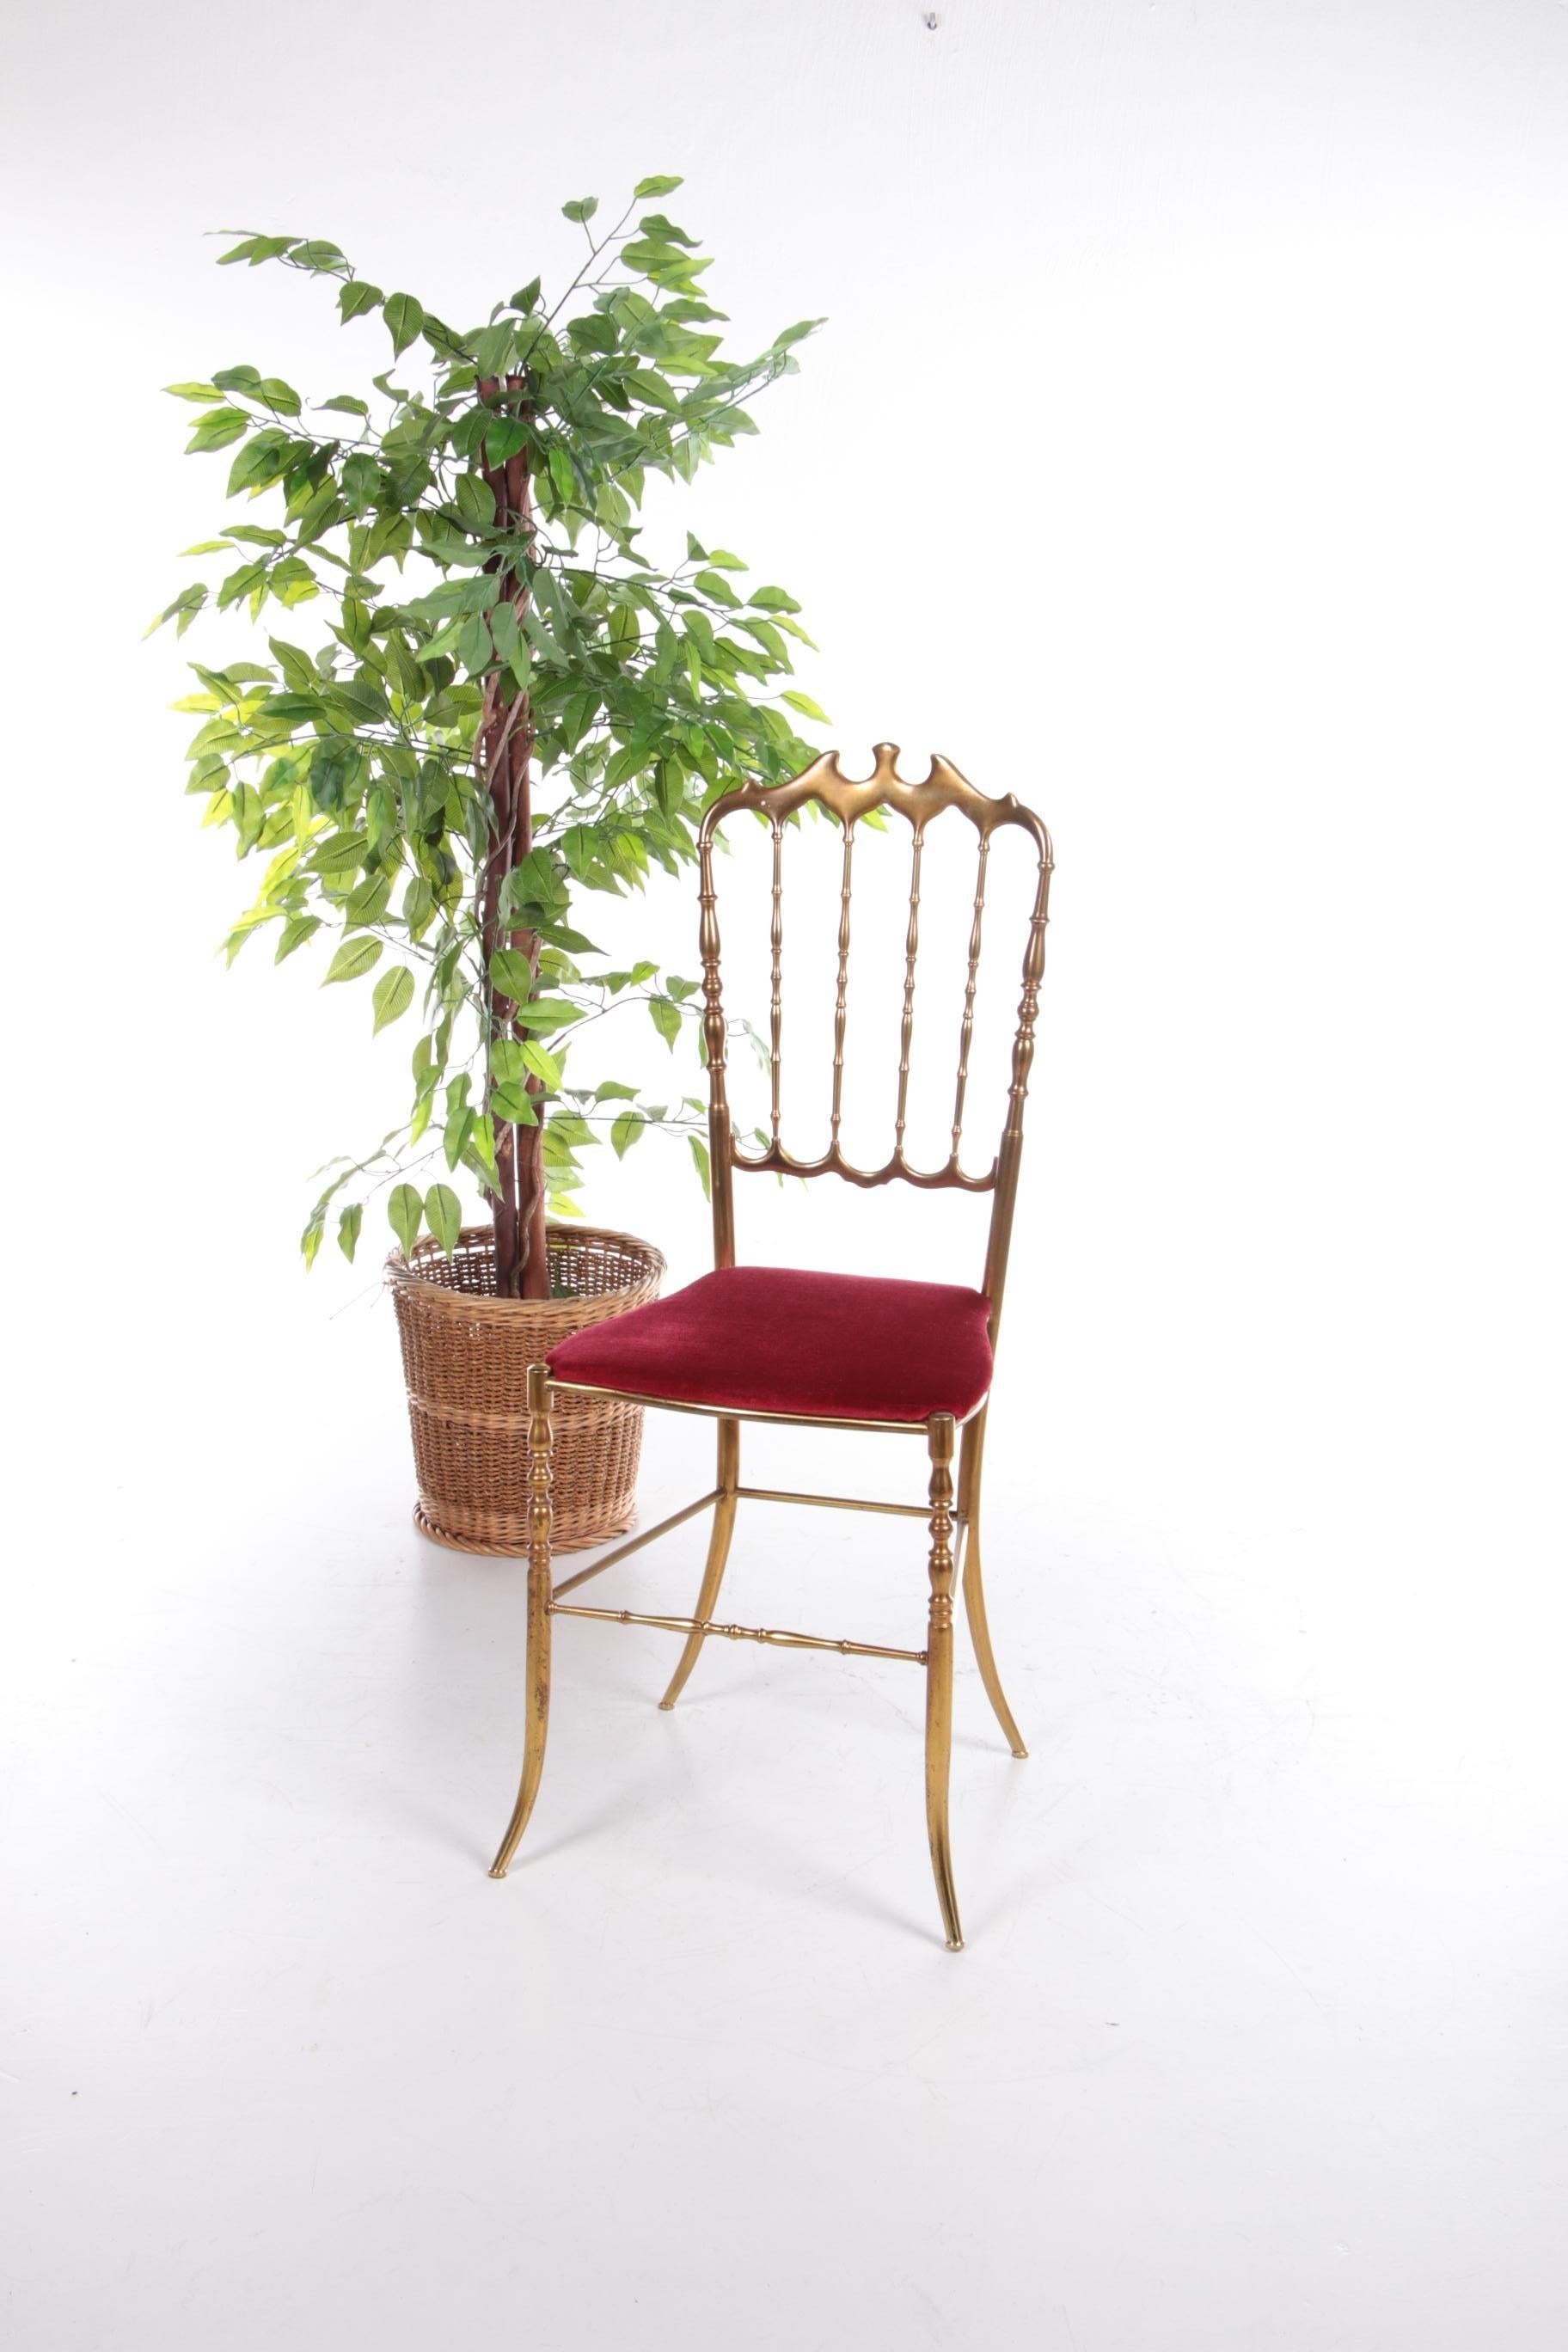 Italian design side chair by Giuseppe Gaetano Descalzi for Chiavari, Italy 1950


Imagine yourself in glamor and luxury with this golden/brass chair from Chiavari.

Country of origin: Italy. Beautiful Italian design with a special design. Great